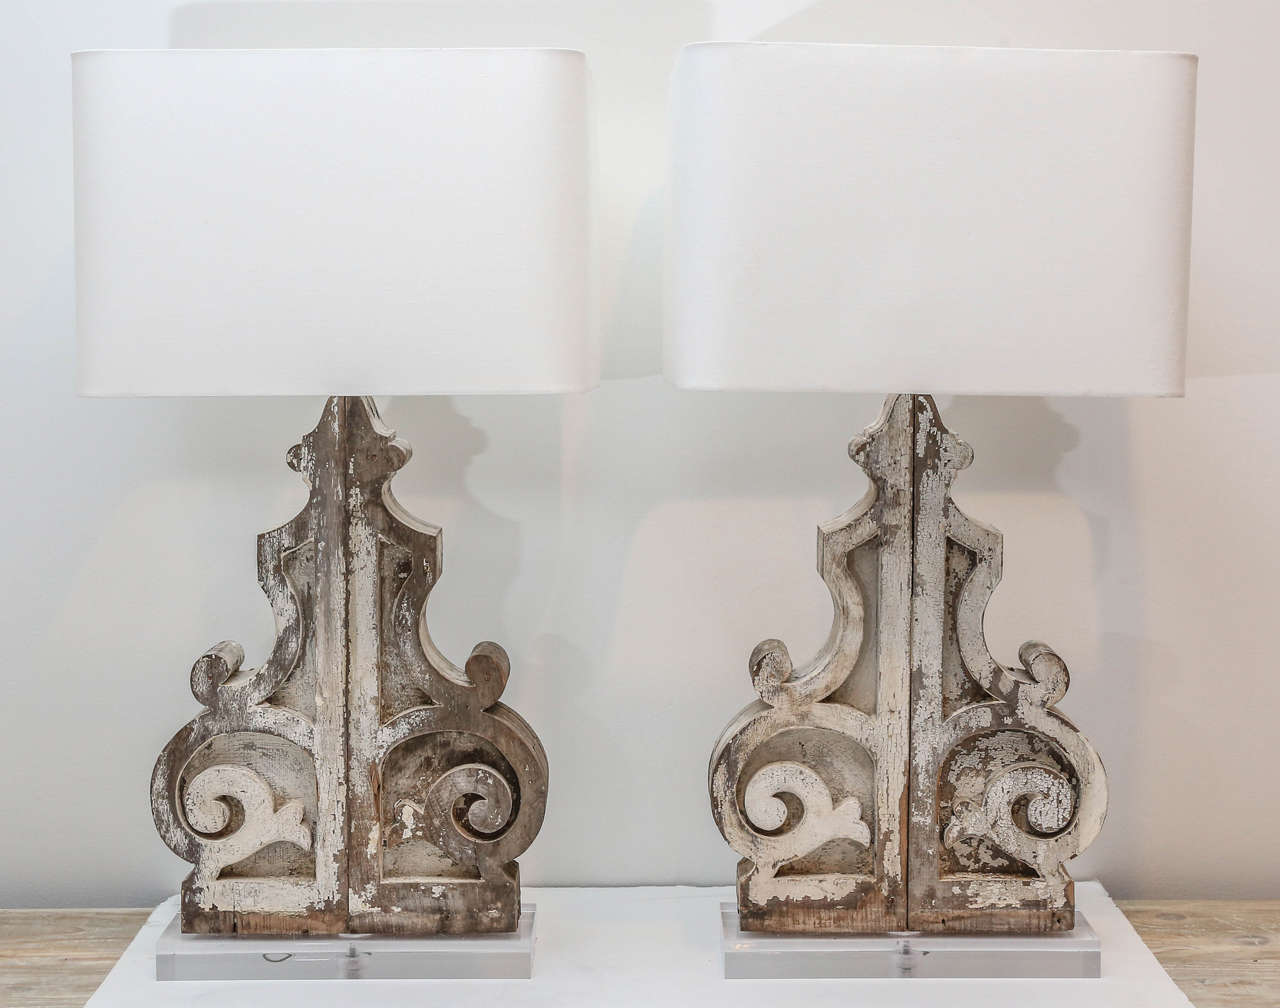 Four white painted 19th century corbels, mounted on Lucite bases, and newly wired as large pair of table lamps with rectangular rolled-edge linen shades.